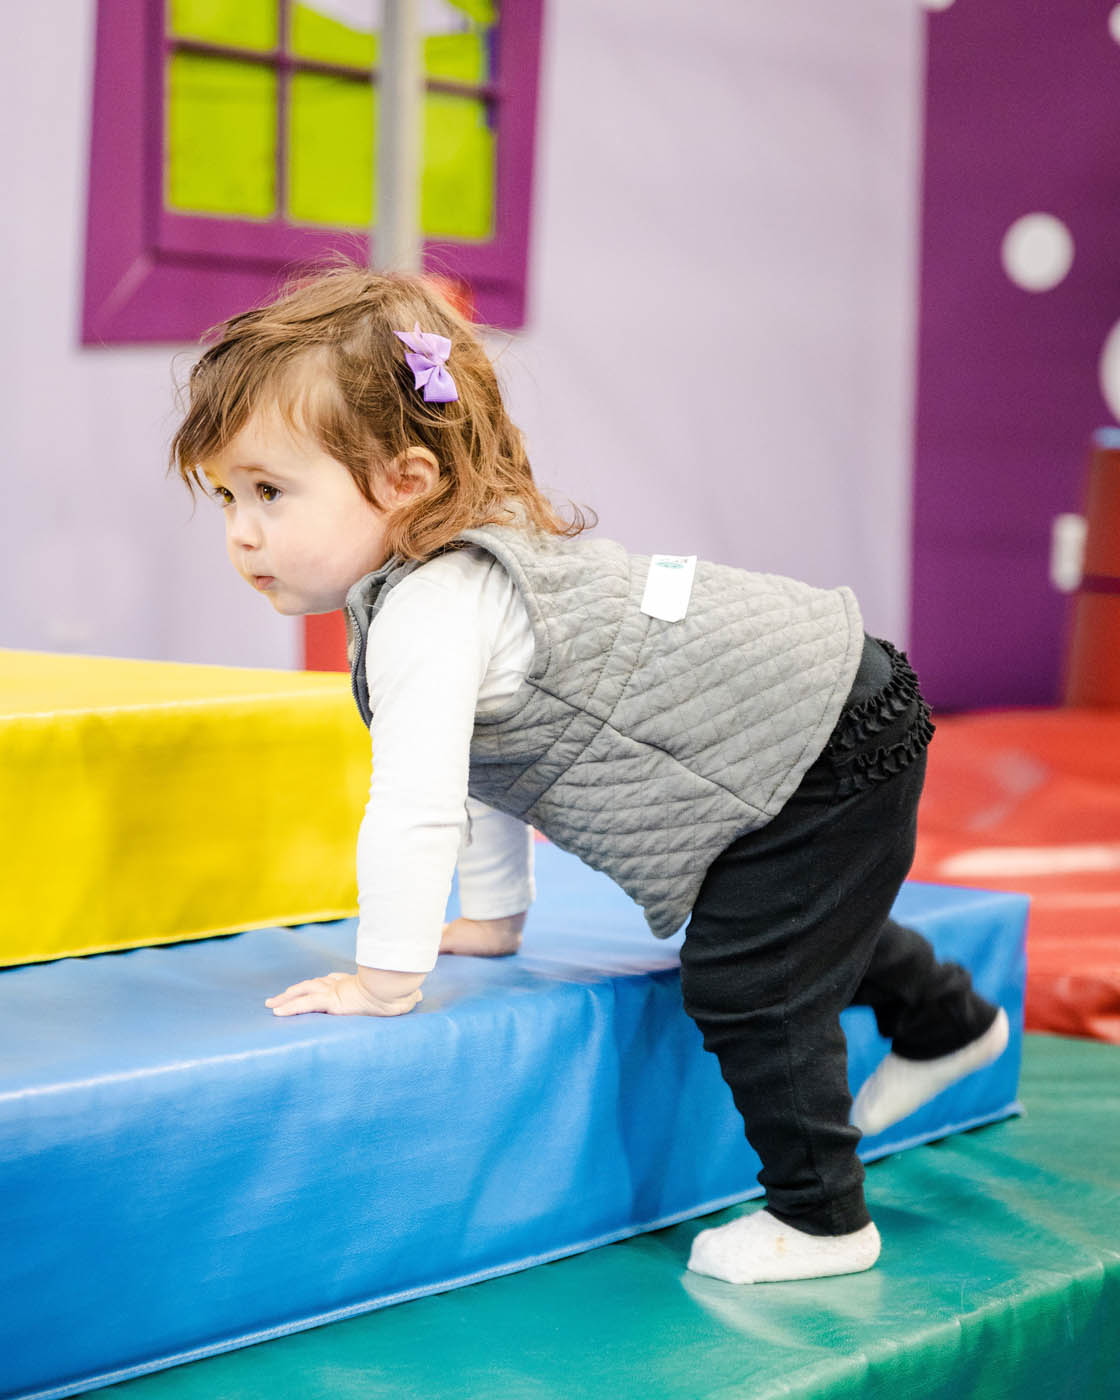 A little girl climbing on soft tumbling equipment for toddlers at Romp n' Roll in Willow Grove, PA.